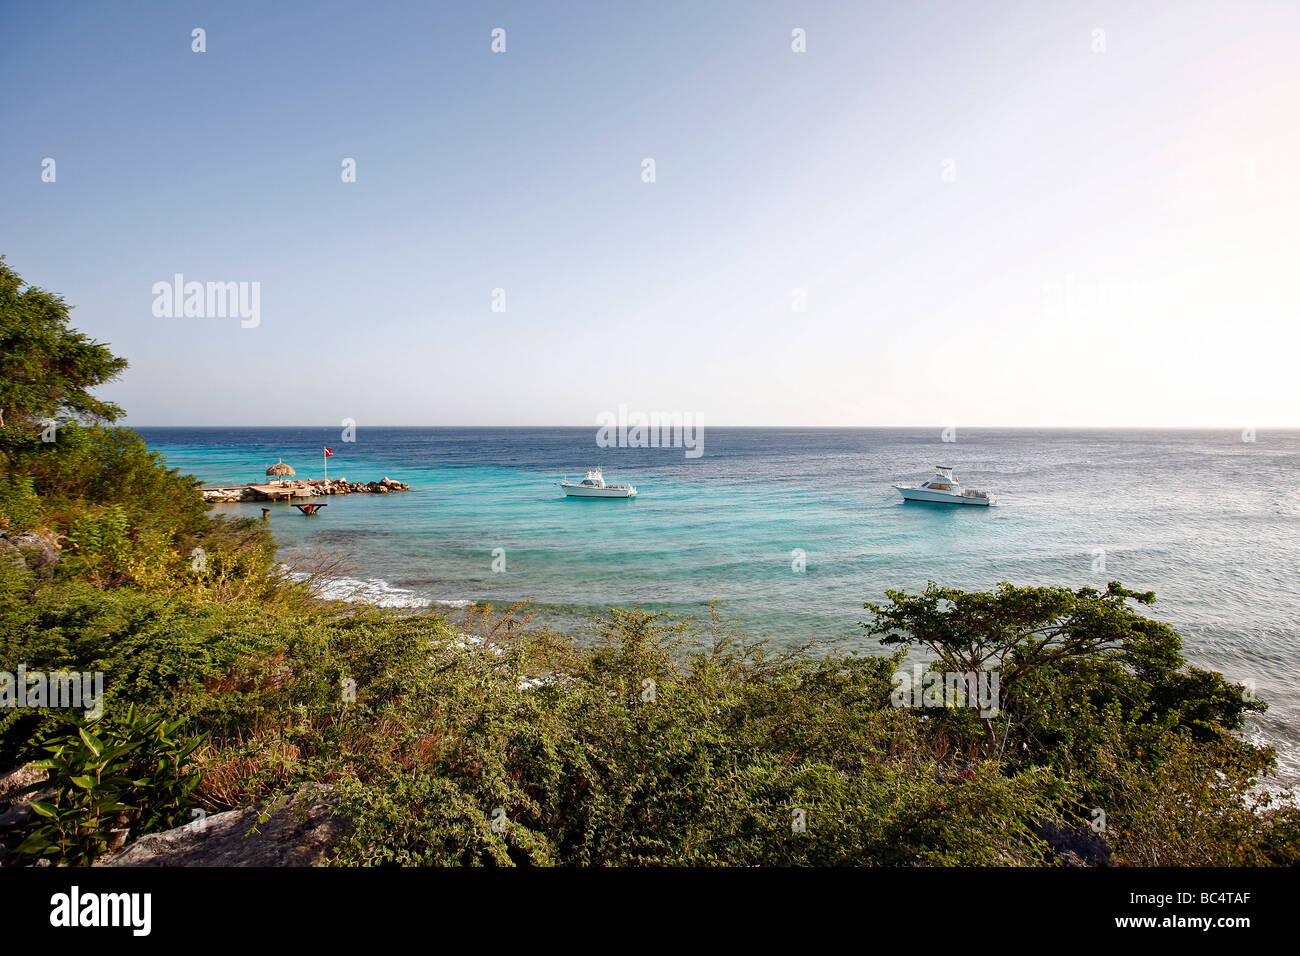 View over the ocean from the Caribbean isle Curacao in the Netherlands Antilles Stock Photo